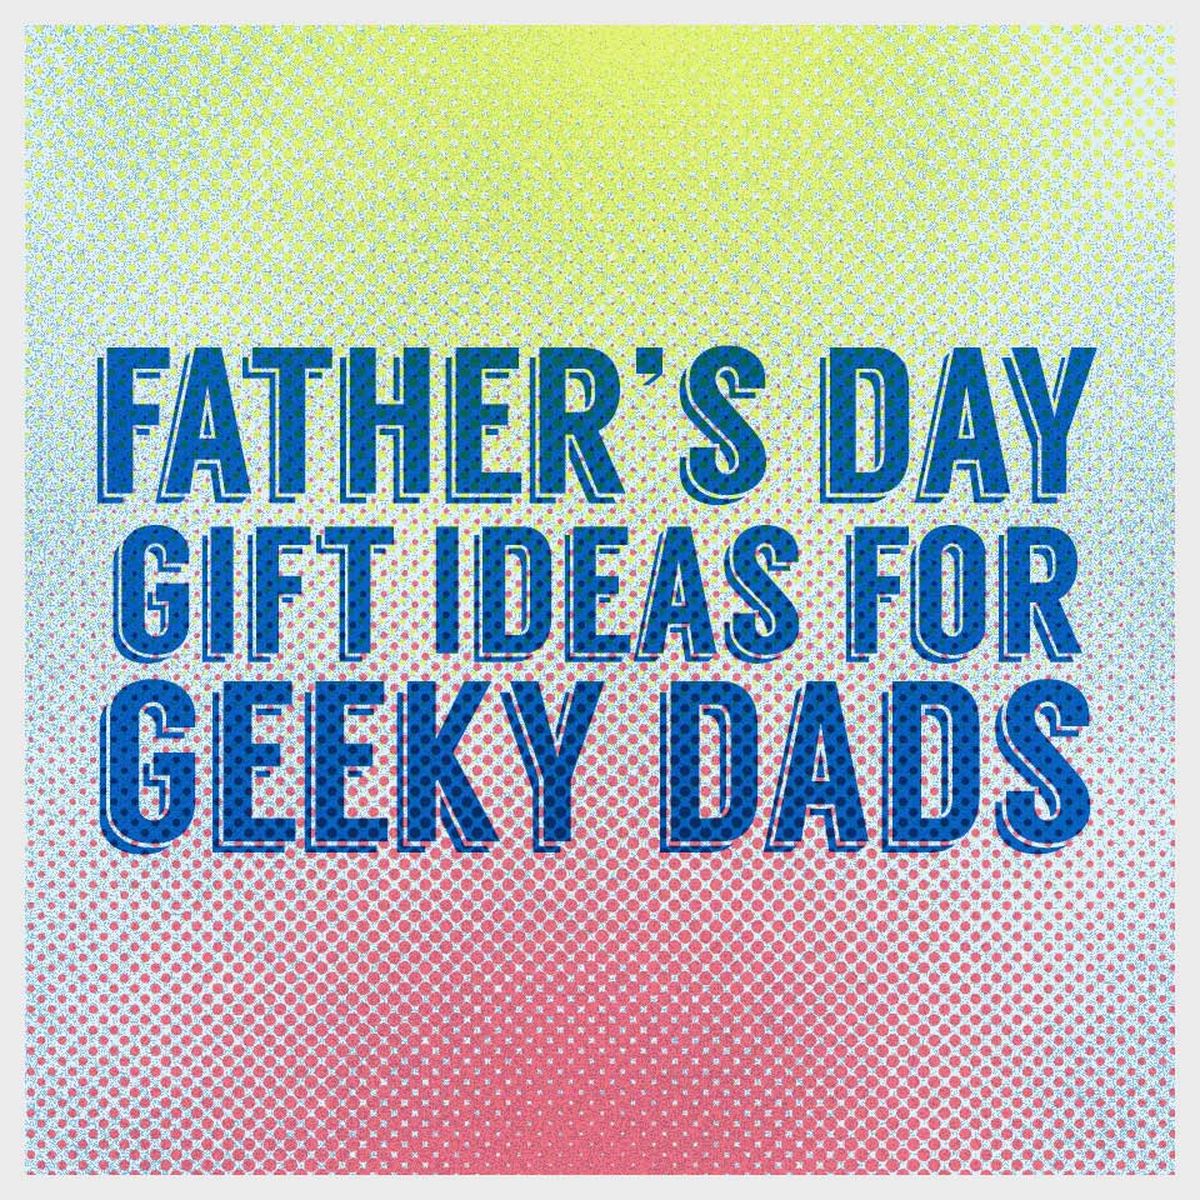 fathers-day-gift-idea-for-geeky-dads